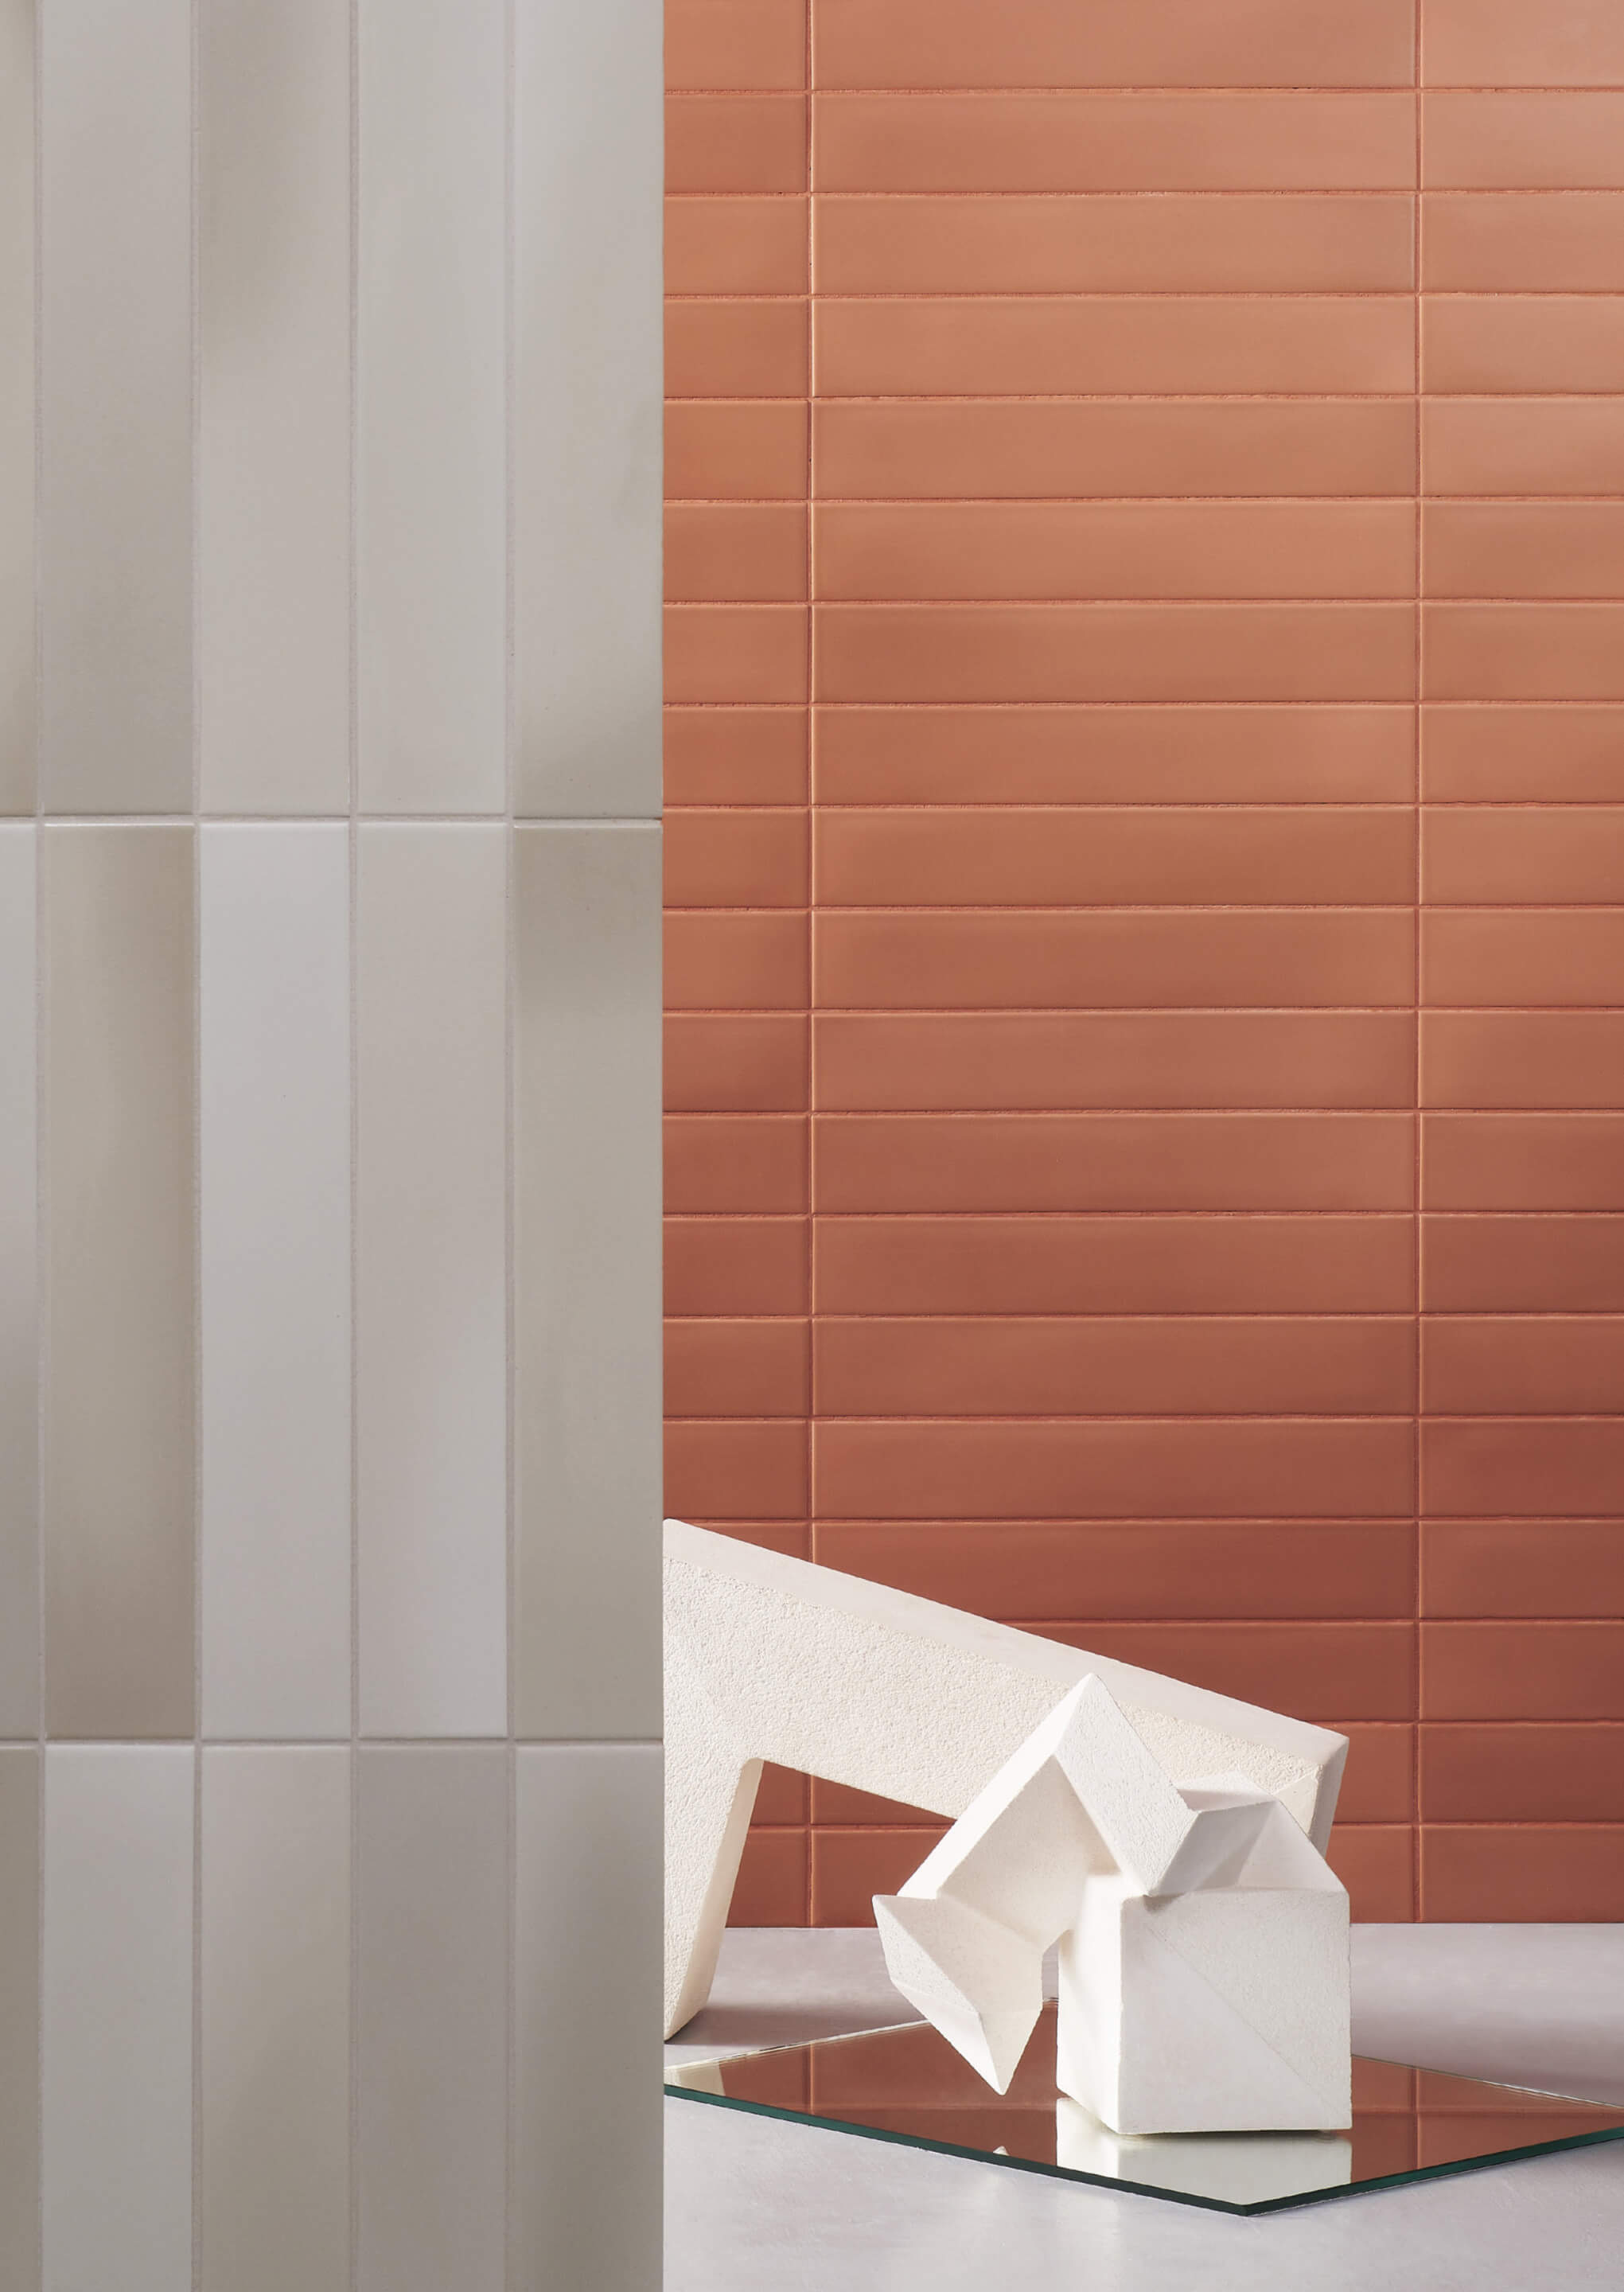 a white sculpture on the floor in front of a wall of terracotta-colored tiles with a wall of vertical dusty white tiles in the foreground occupying left third of the image